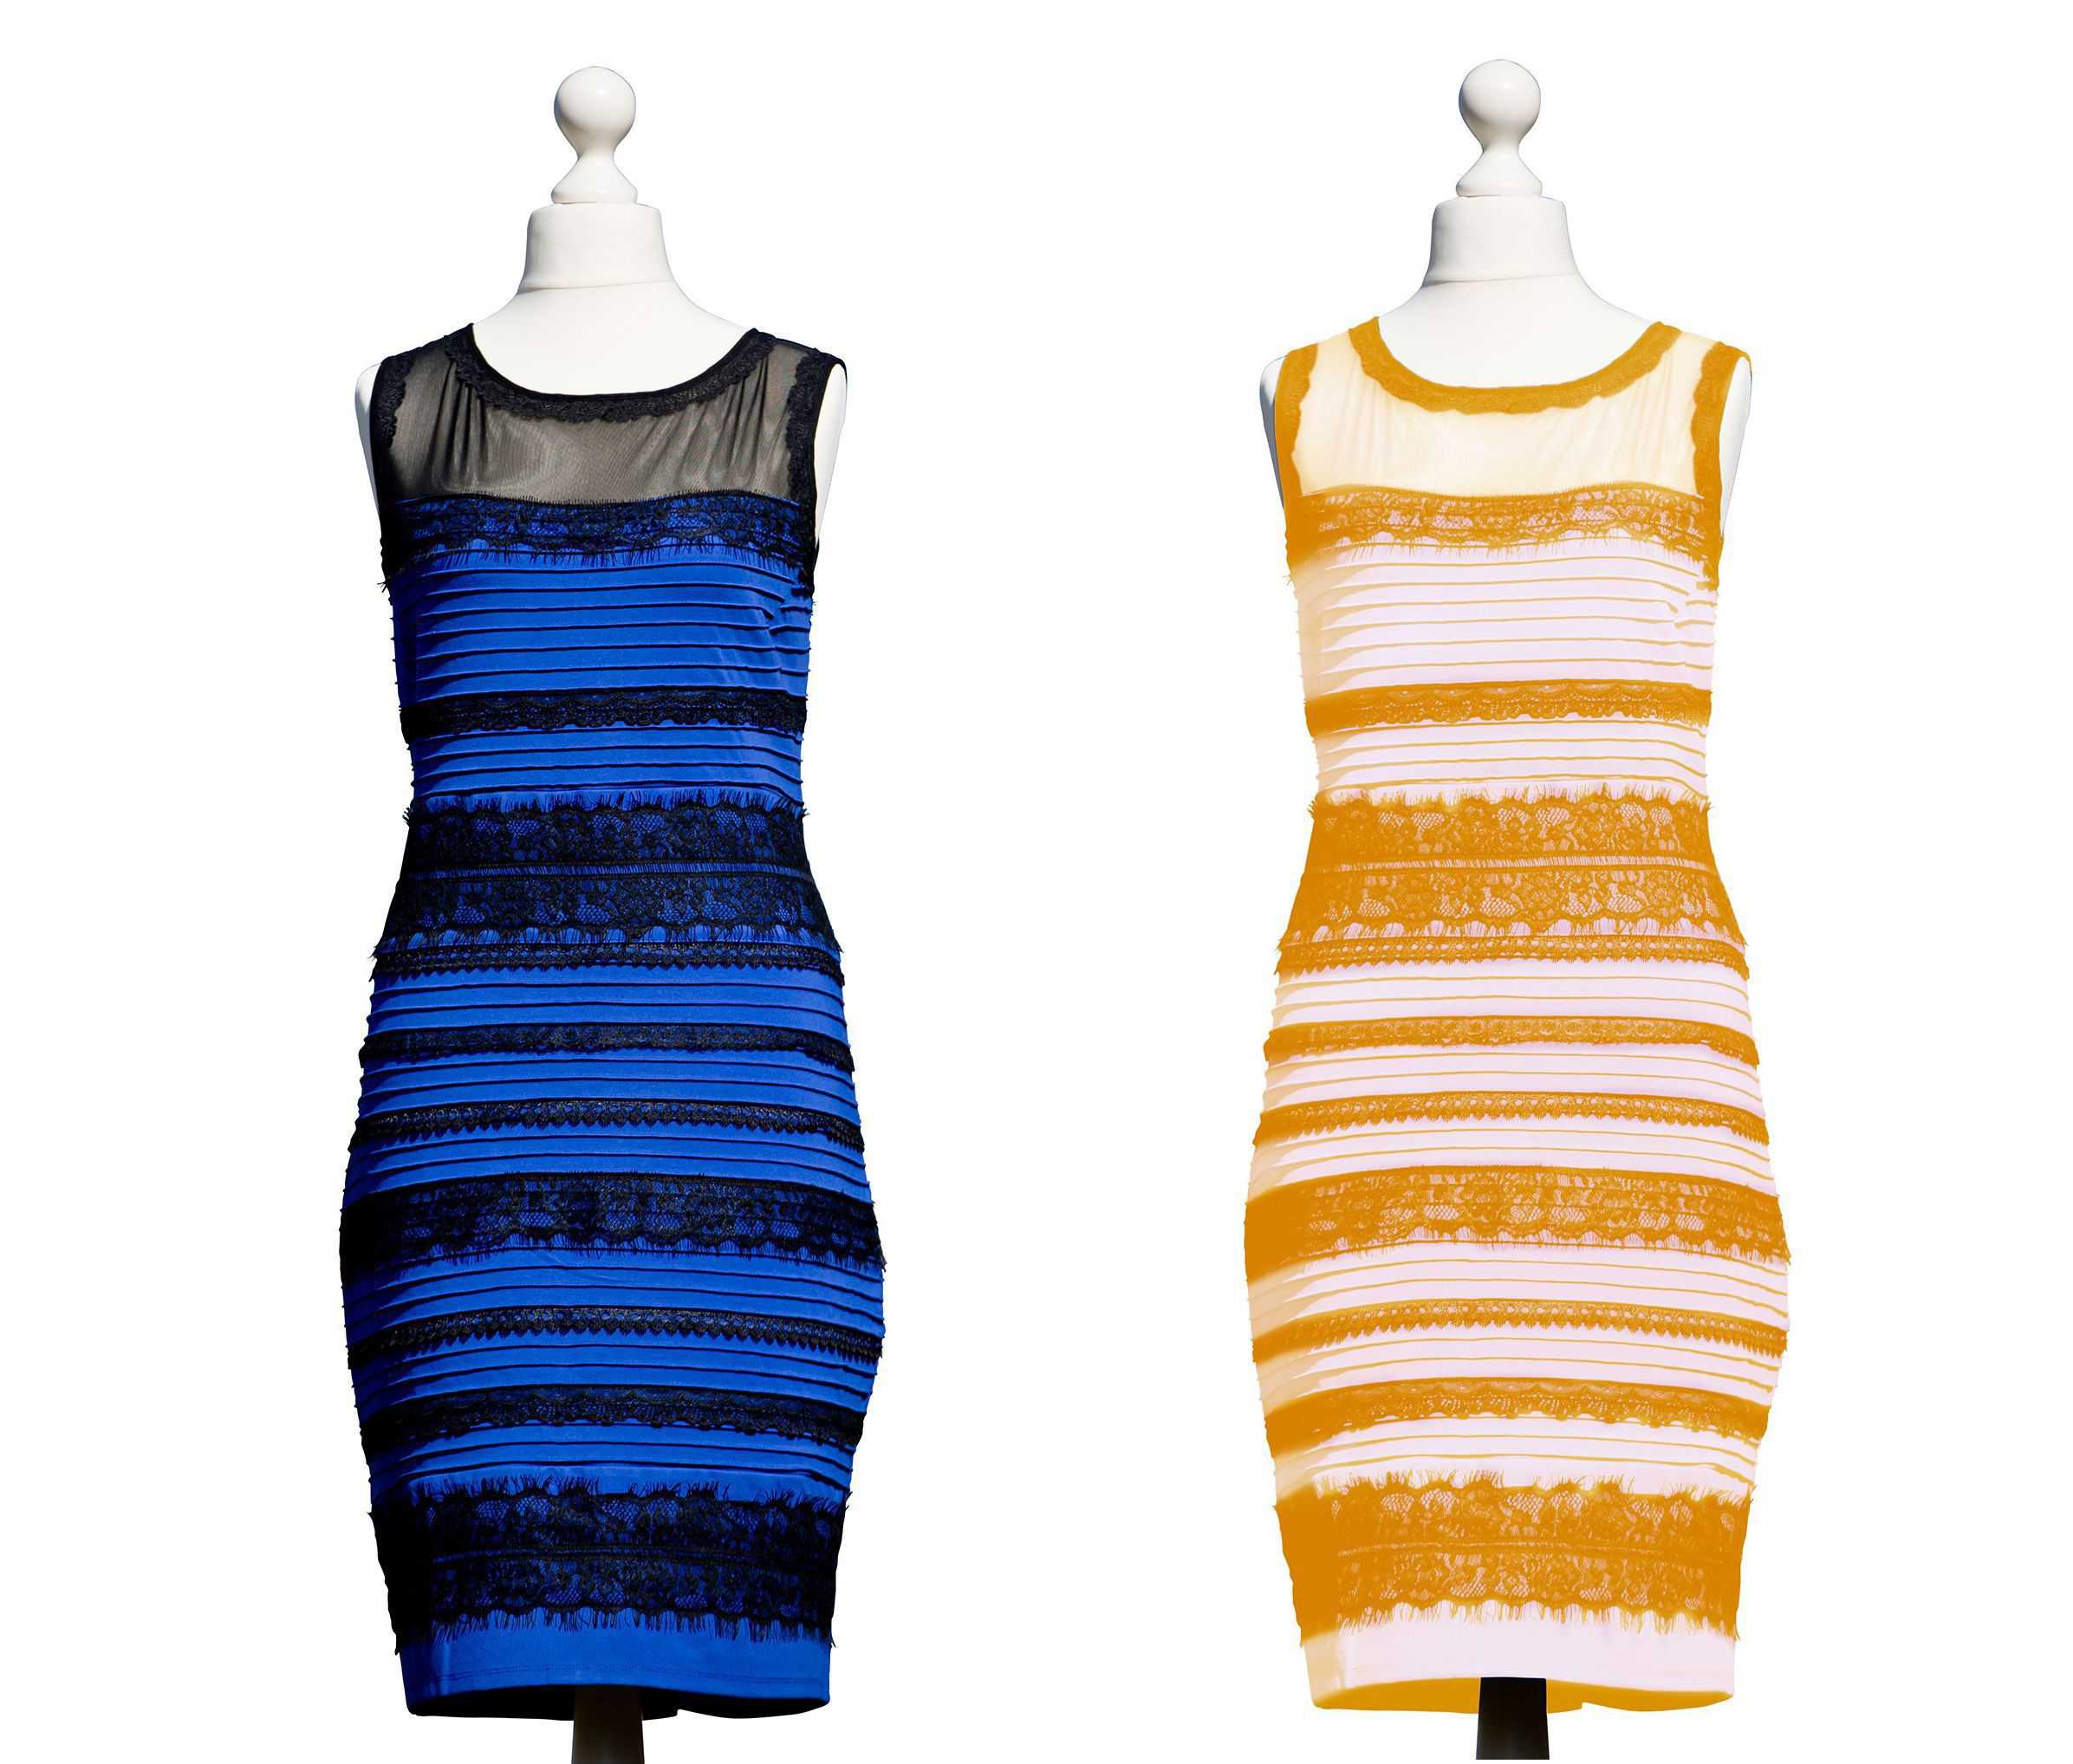 There are two photos of the same dress. A blue and black dress is on the left.  The same dress is on the right but has a filter applied which makes it look white and gold.